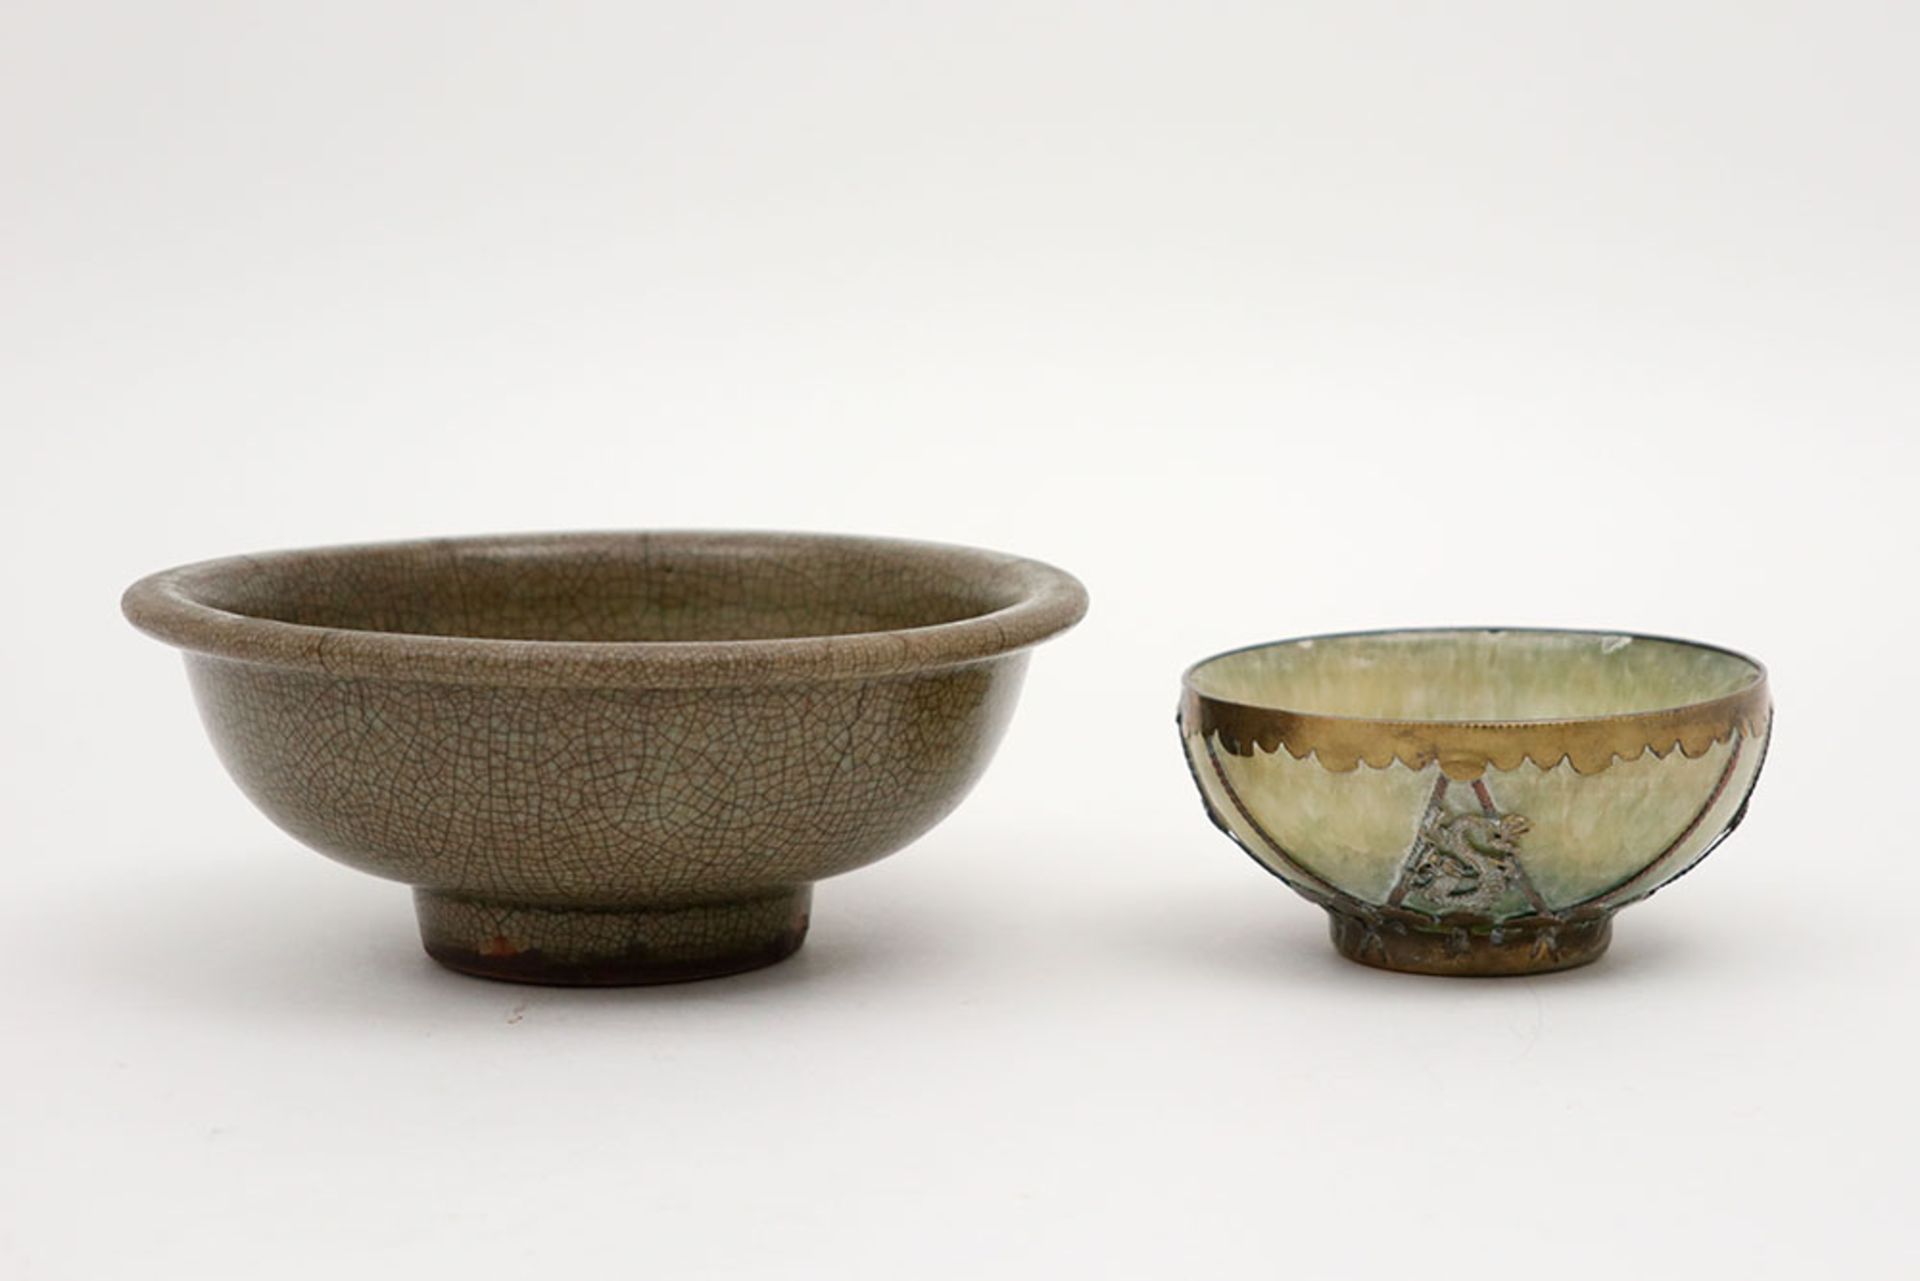 antique Chinese bowl in crackle glazed porcelain and a small Chinese marked bowl in a greenish stone